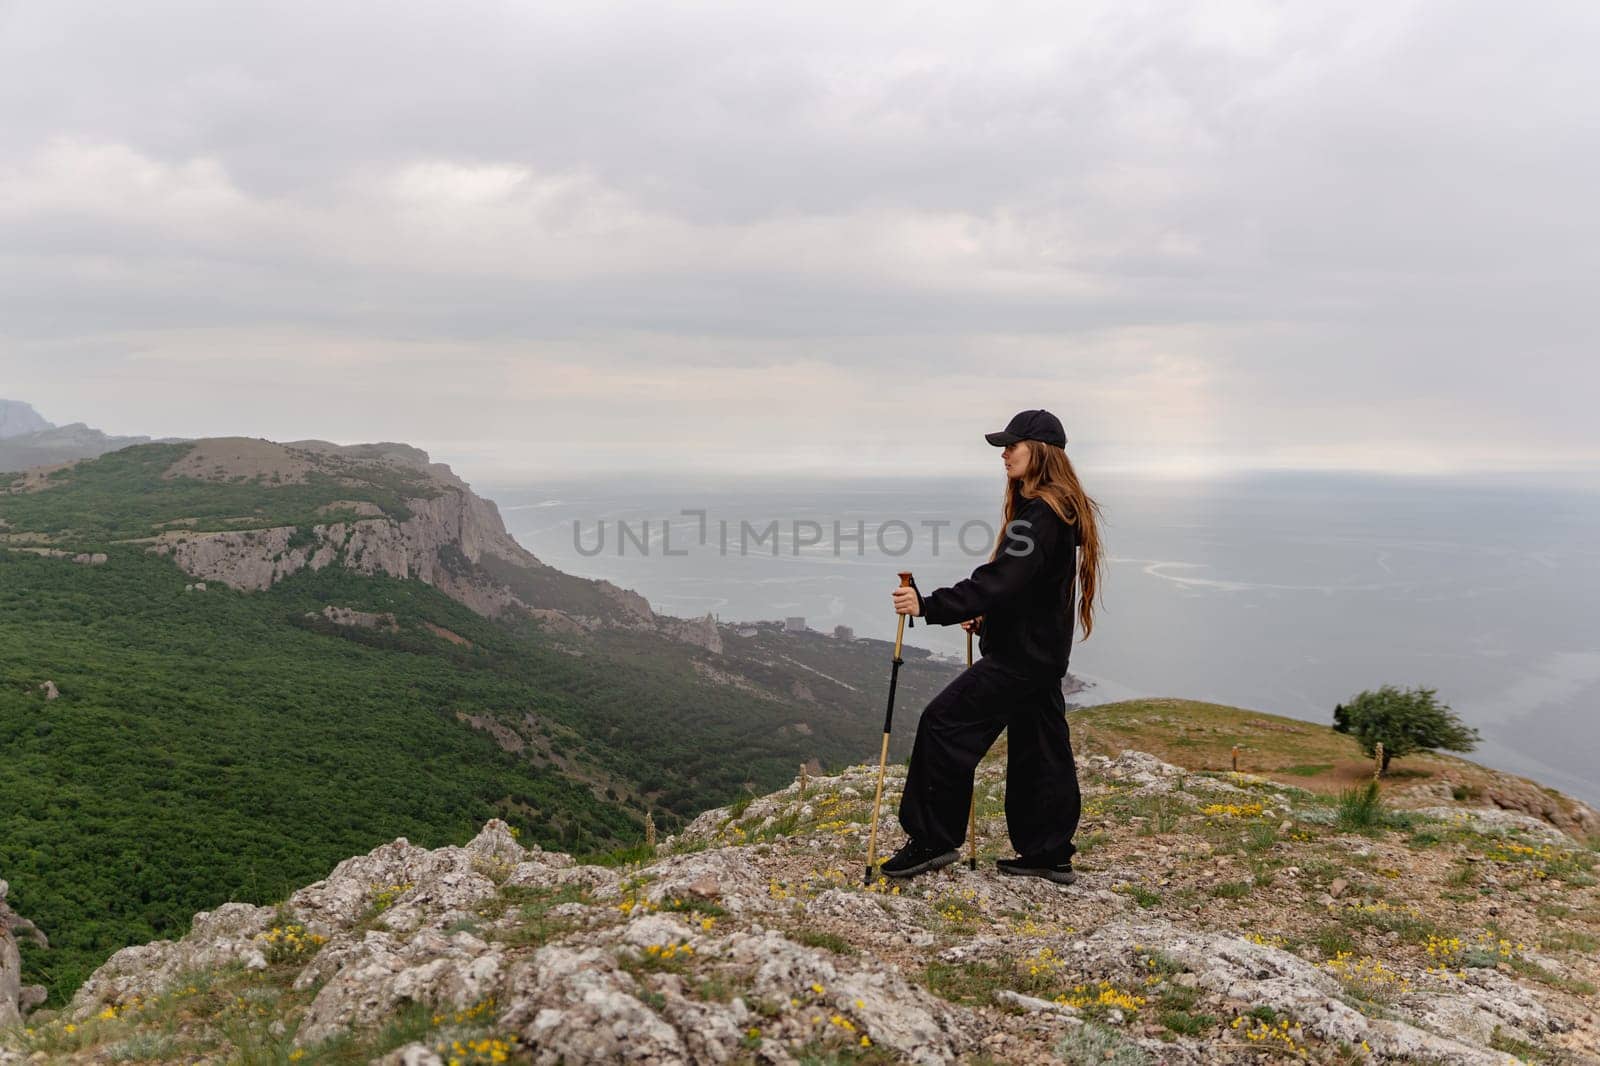 A woman stands on a mountain top, looking out over the ocean. The sky is cloudy, and the woman is wearing a black jacket